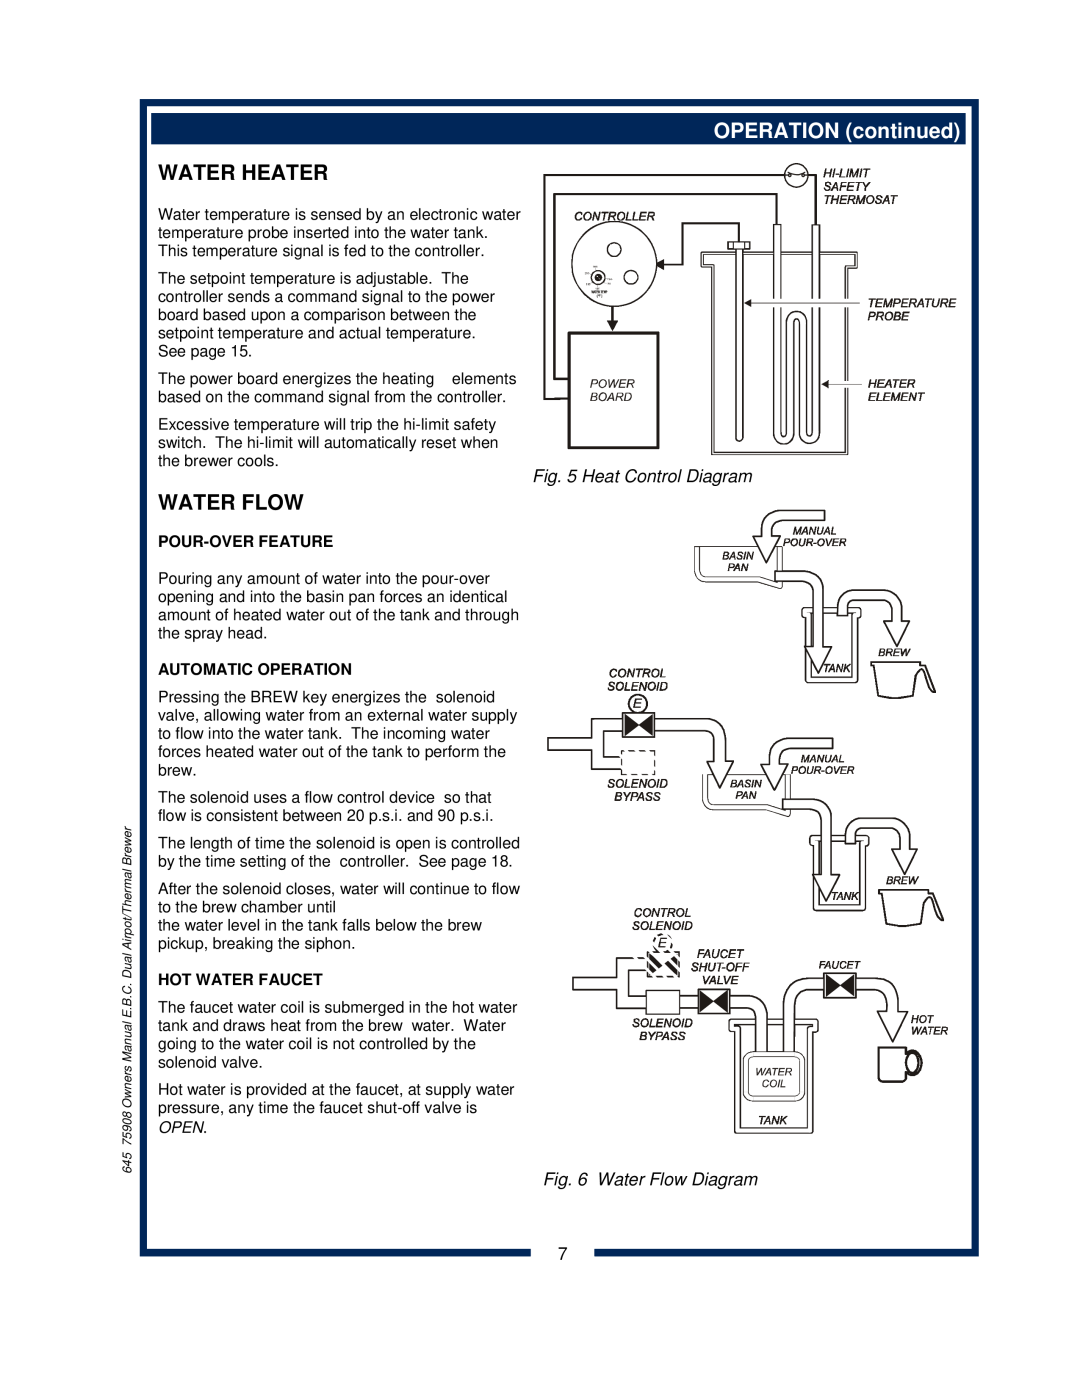 Bloomfield 1092 OPERATION continued, Water Heater, Heat Control Diagram, Water Flow Diagram, Pour-Overfeature, Open 